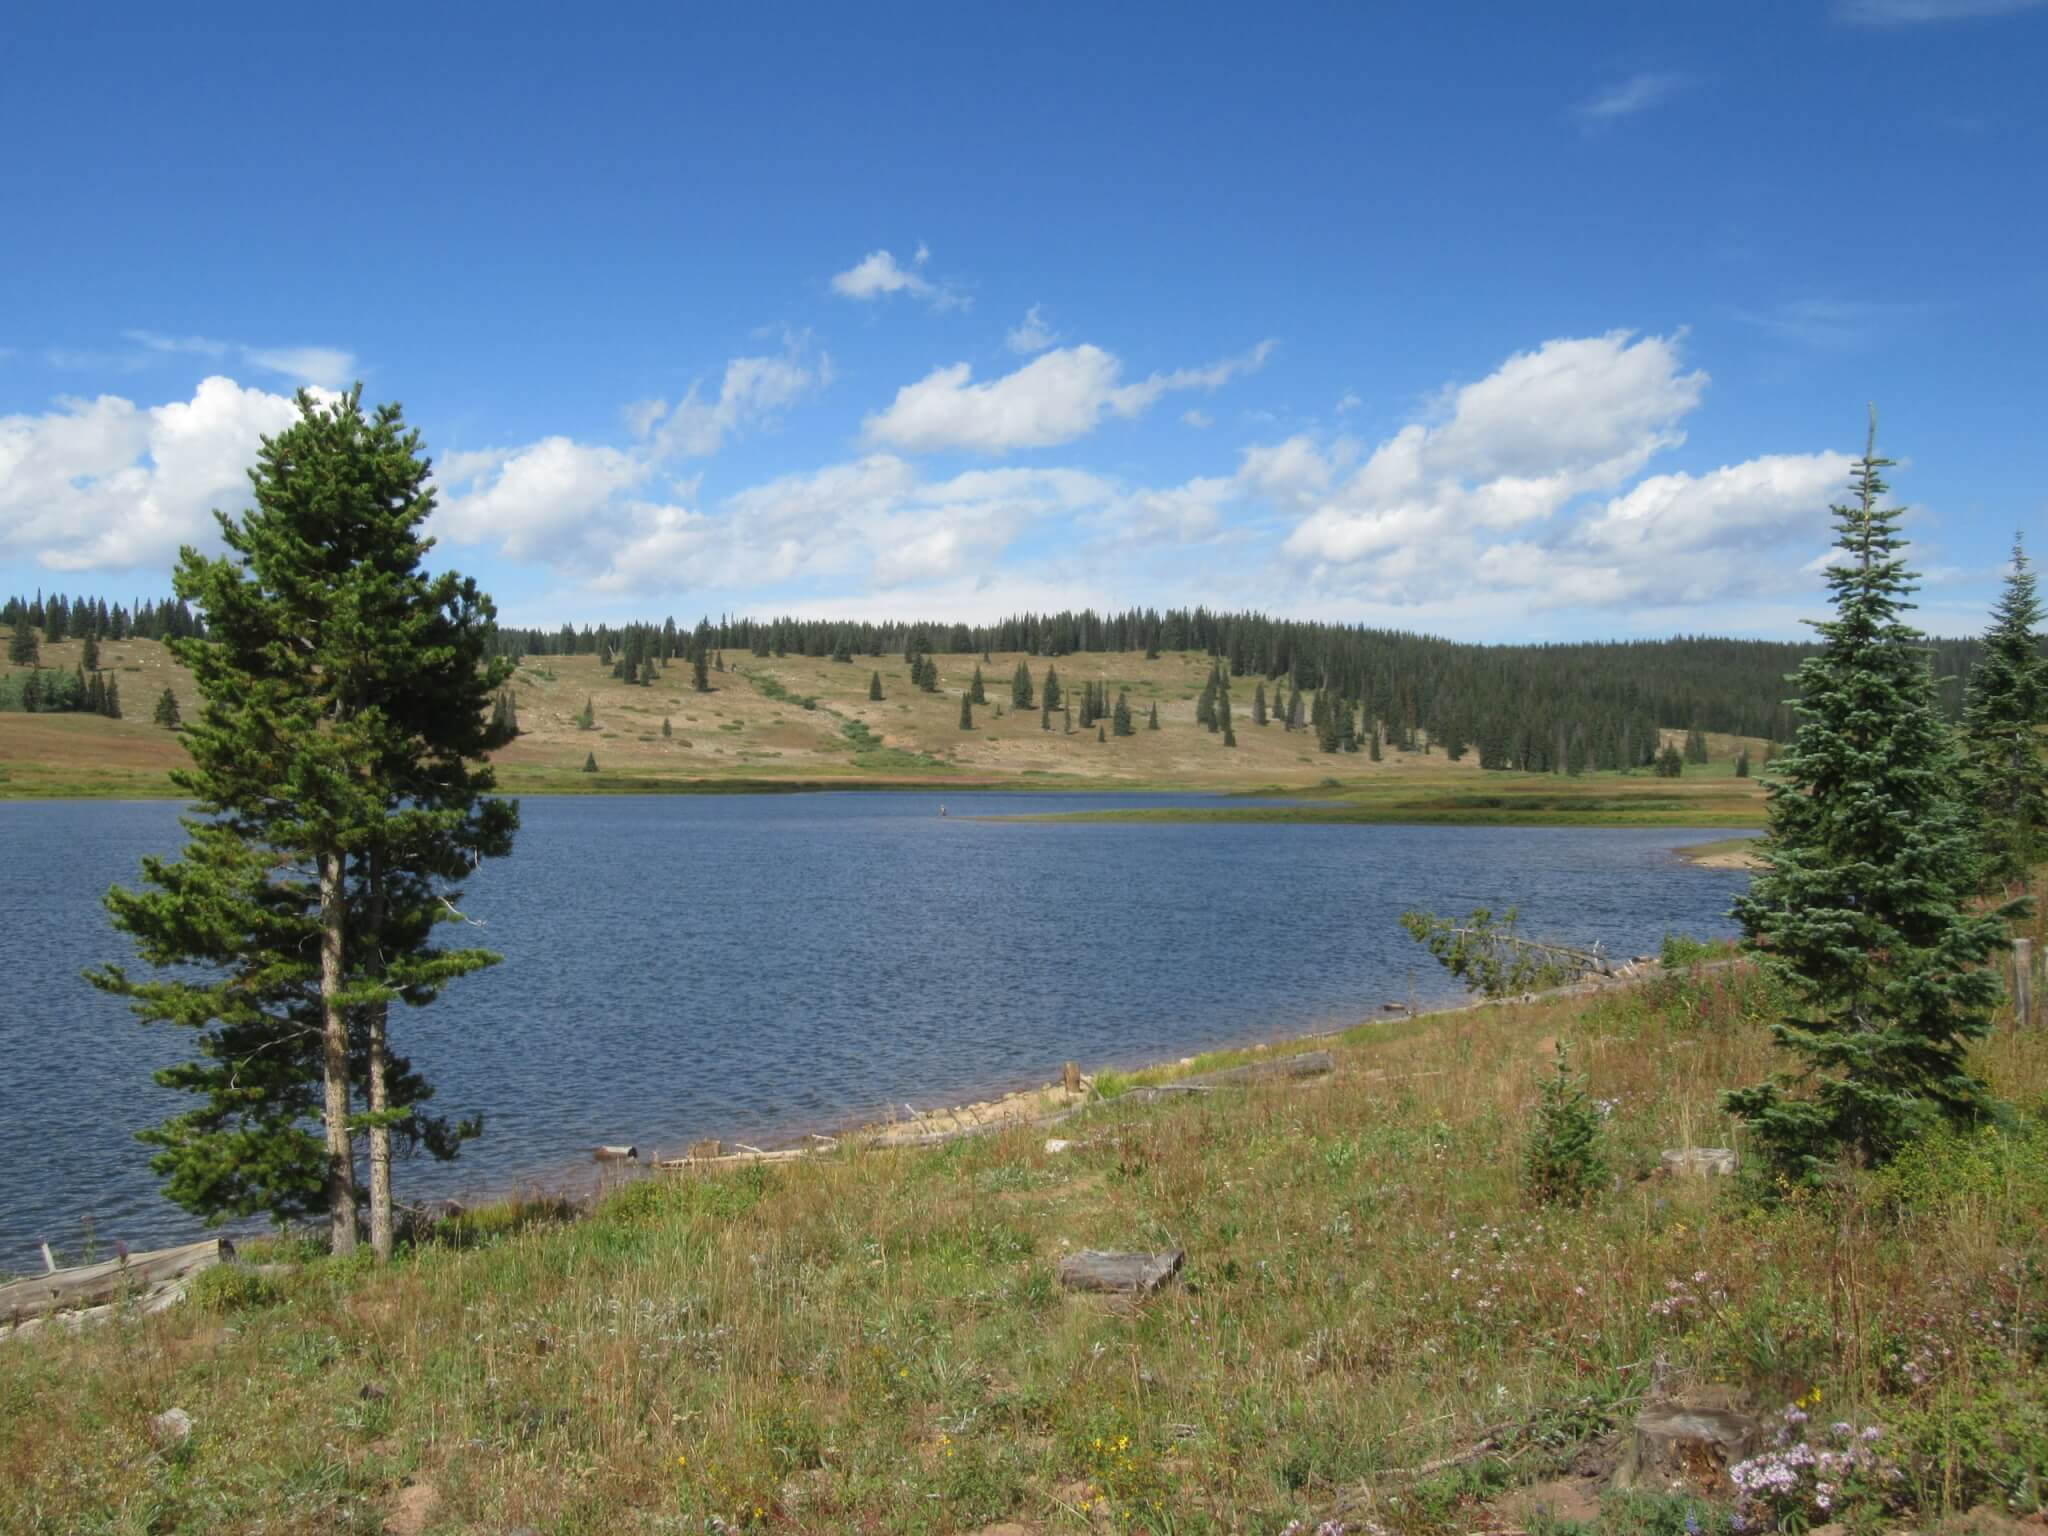 Best Steamboat Springs Area Campgrounds - Dumont Lake